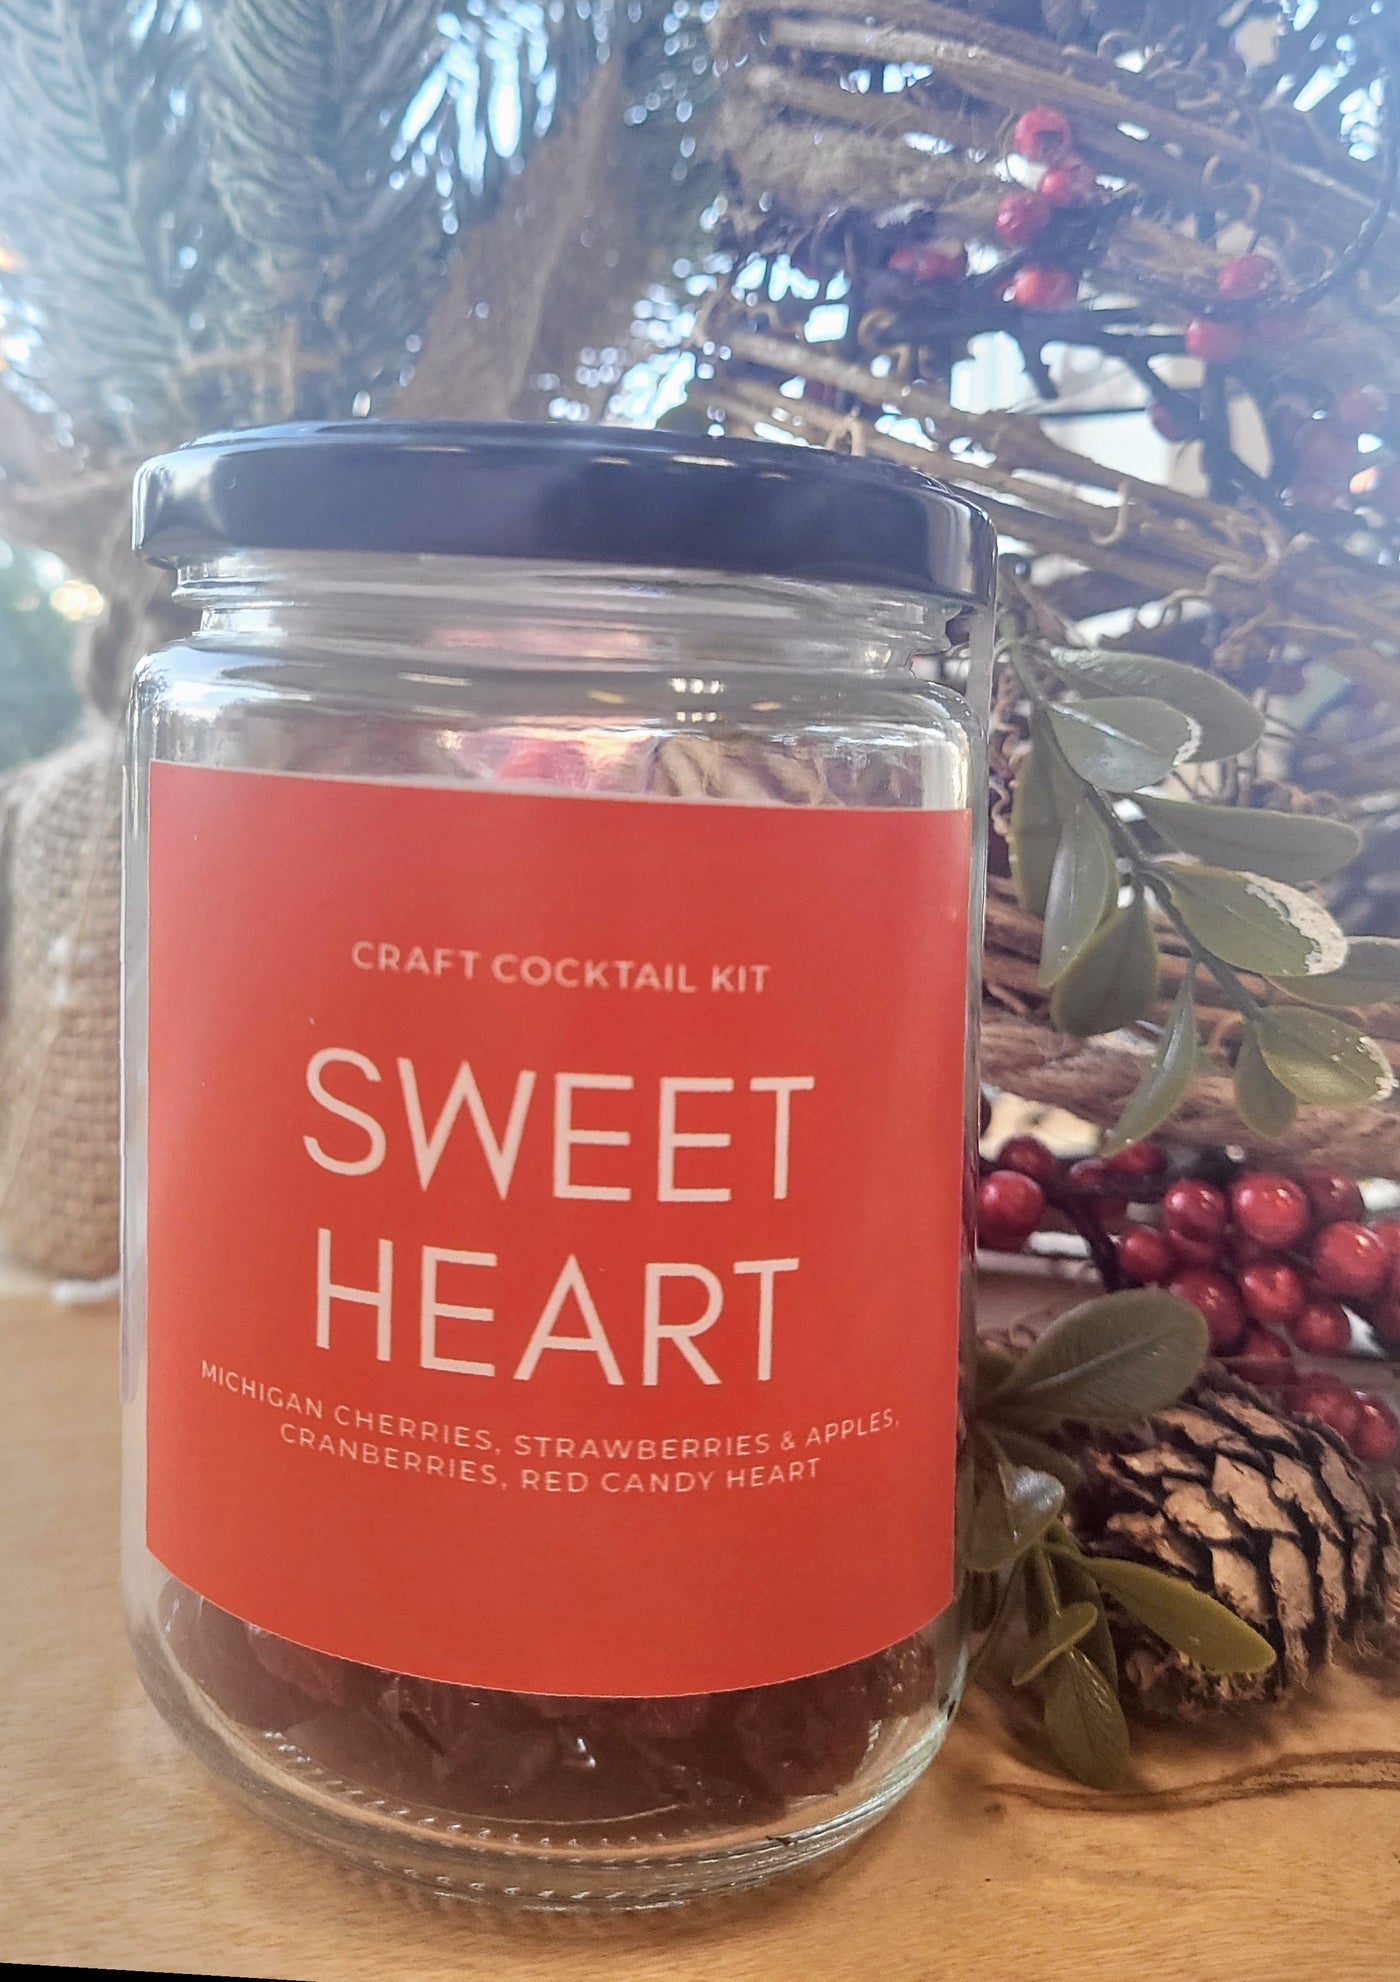 Sweet Heart Craft Cocktail Kit